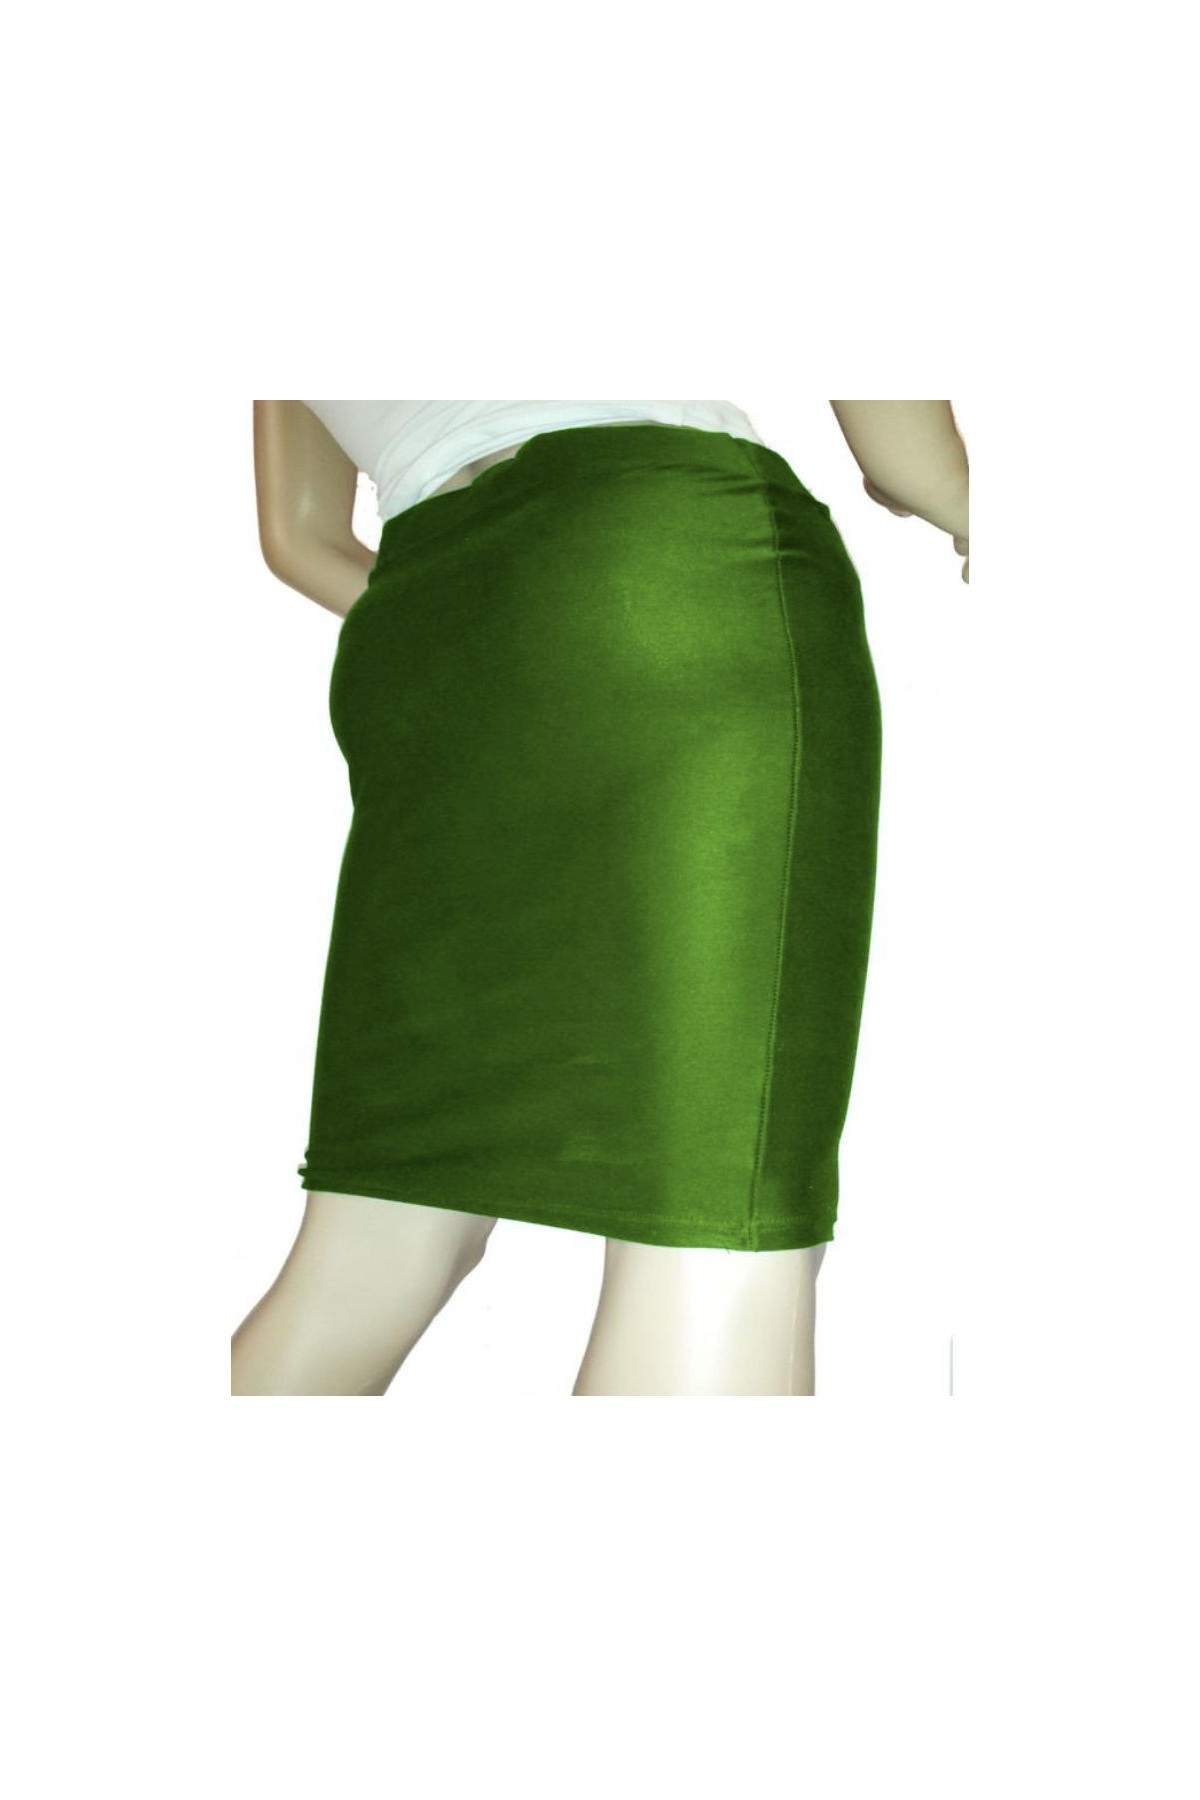 Save 15 percent on Green Knee Long Stretch Skirt Sizes 44 - 52 - 